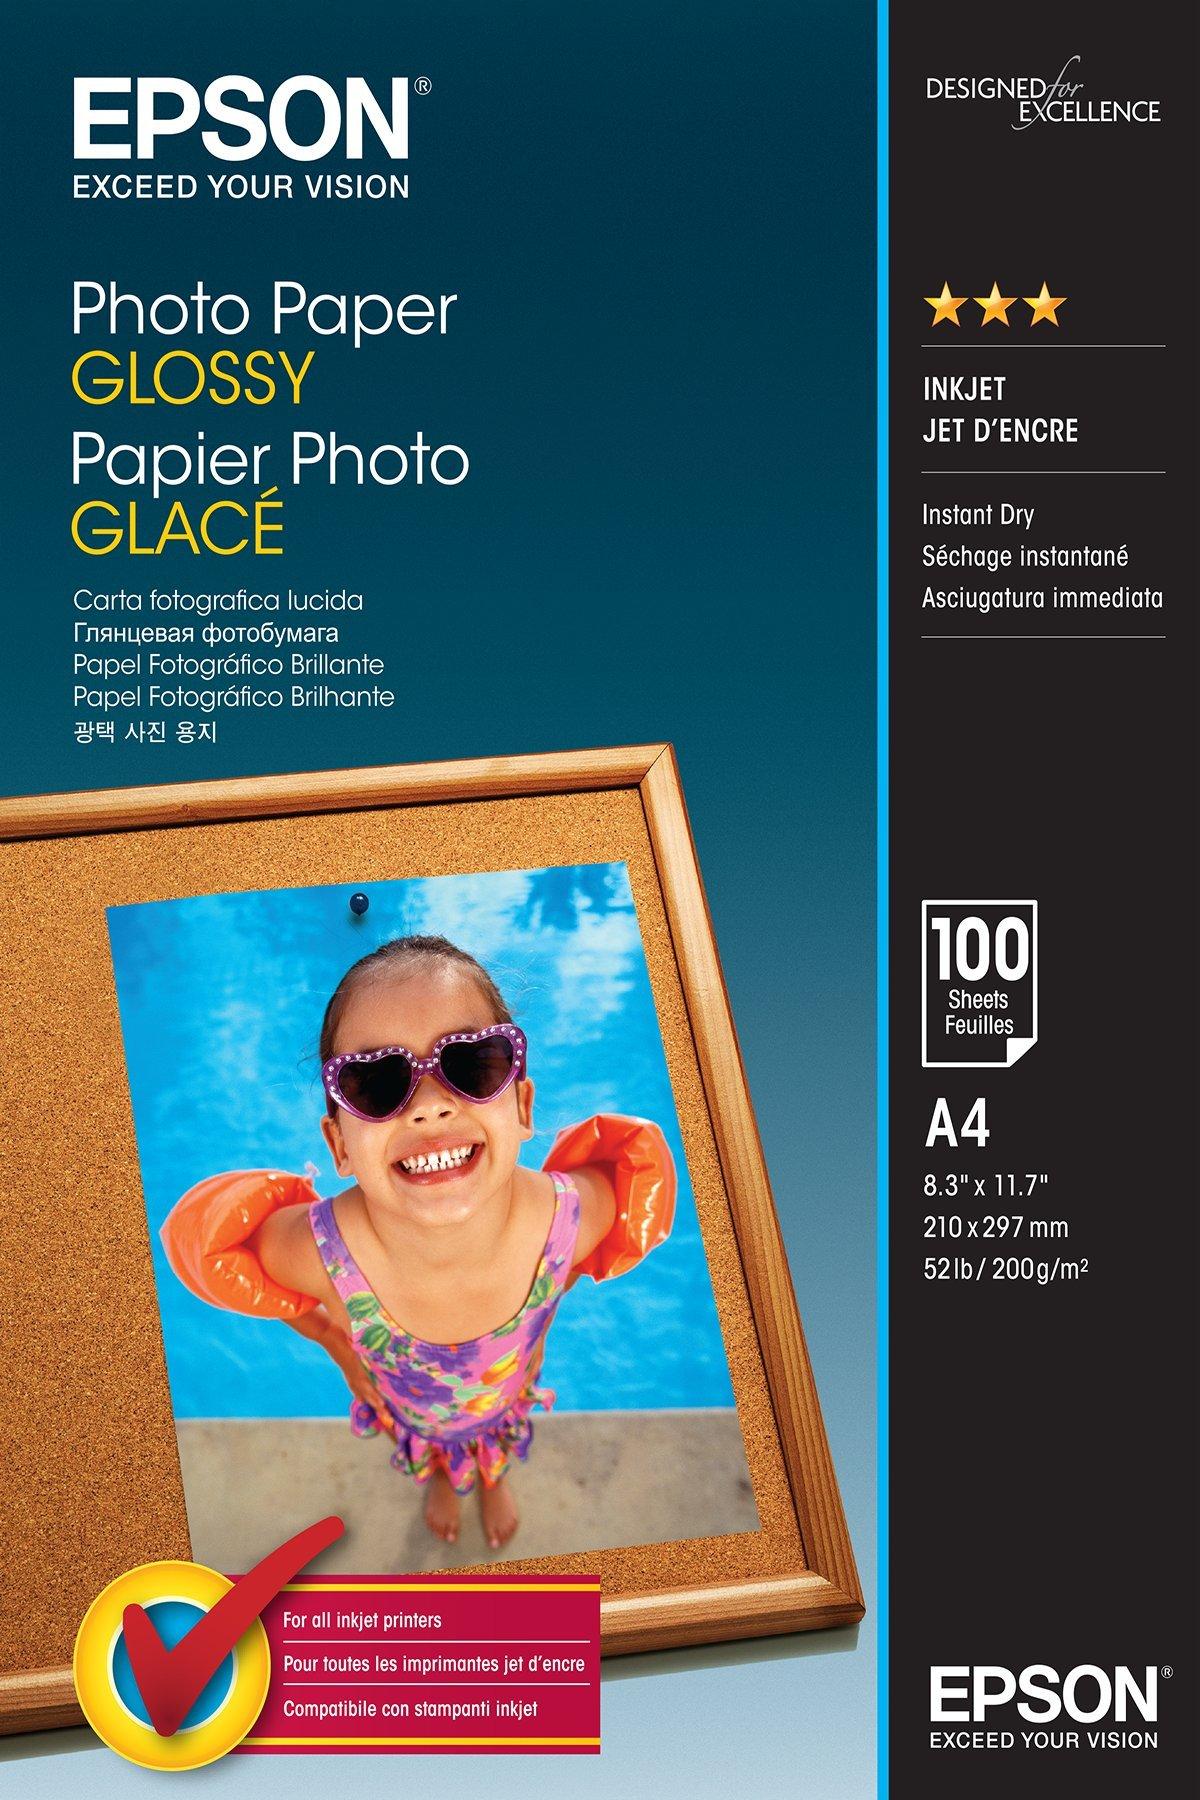 Photo Paper Glossy - - 100 sheets | Paper | Ink & Paper | Products | Epson Europe